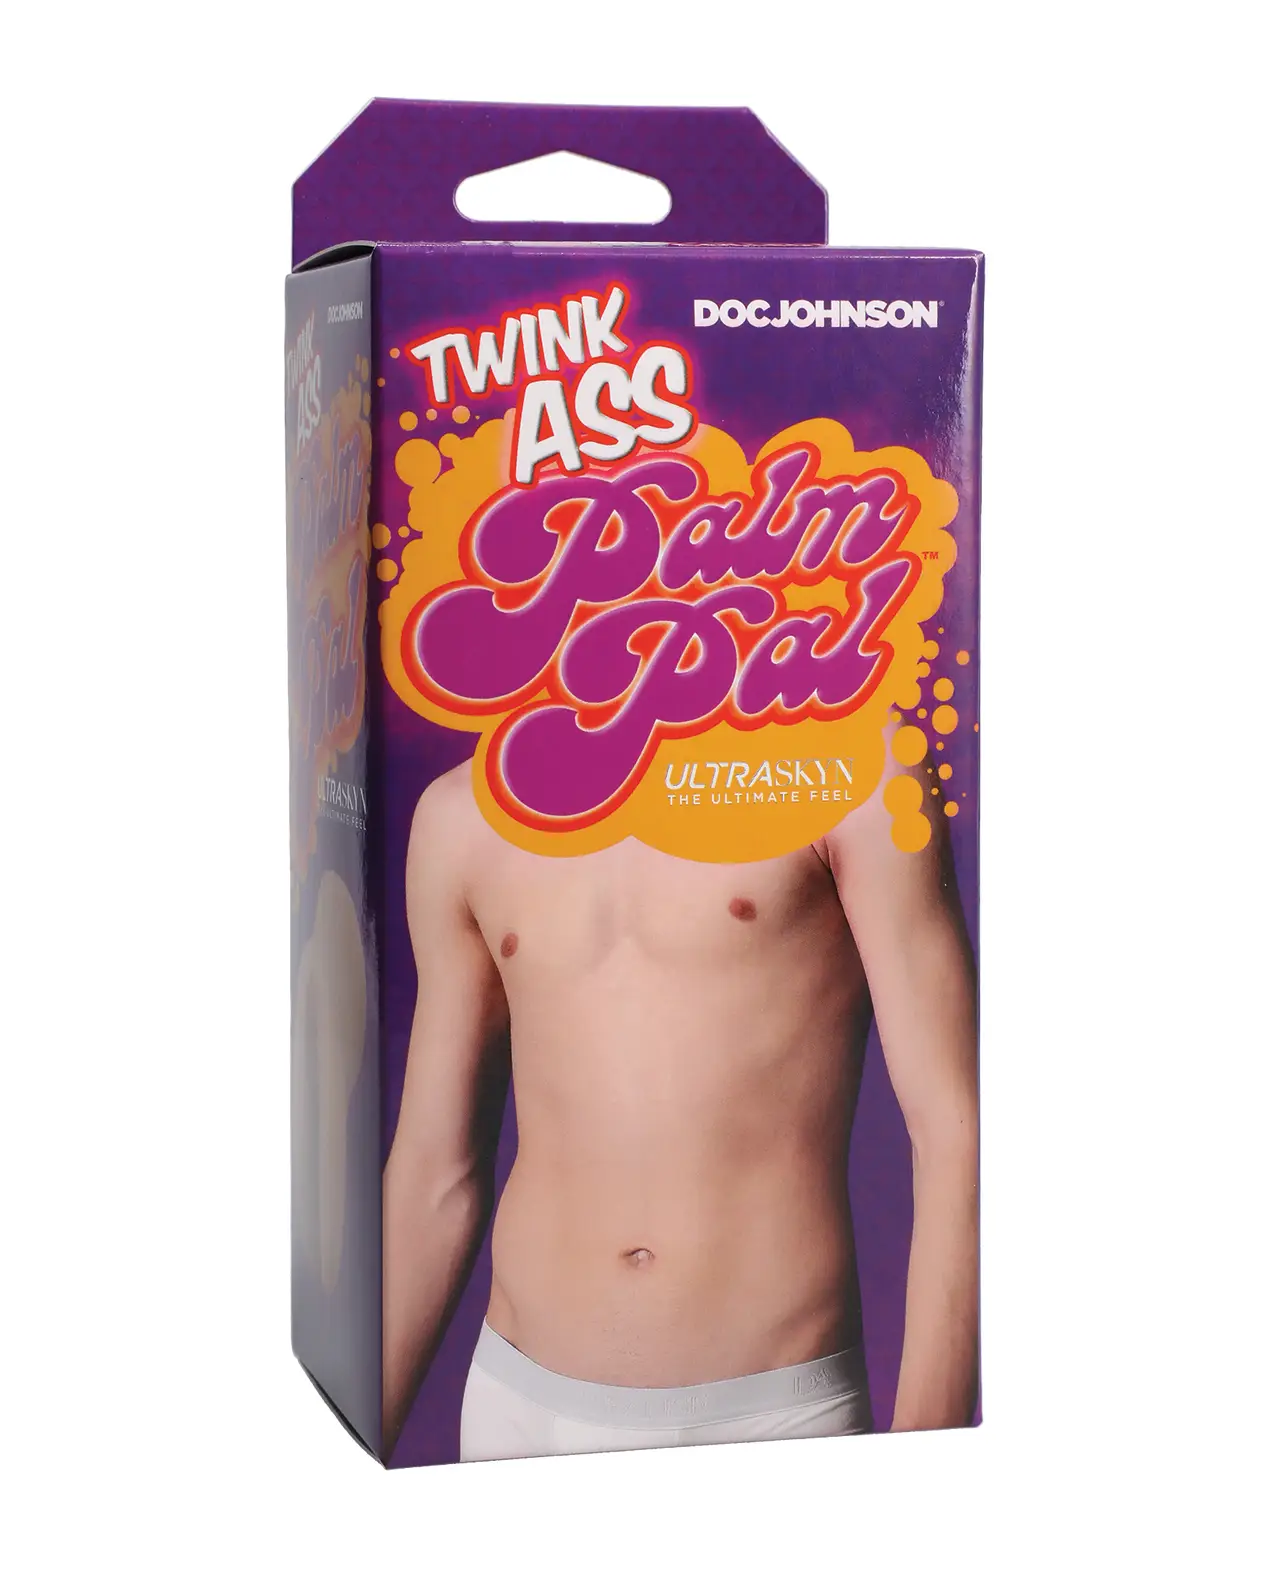 Male chest on a box with a purple background